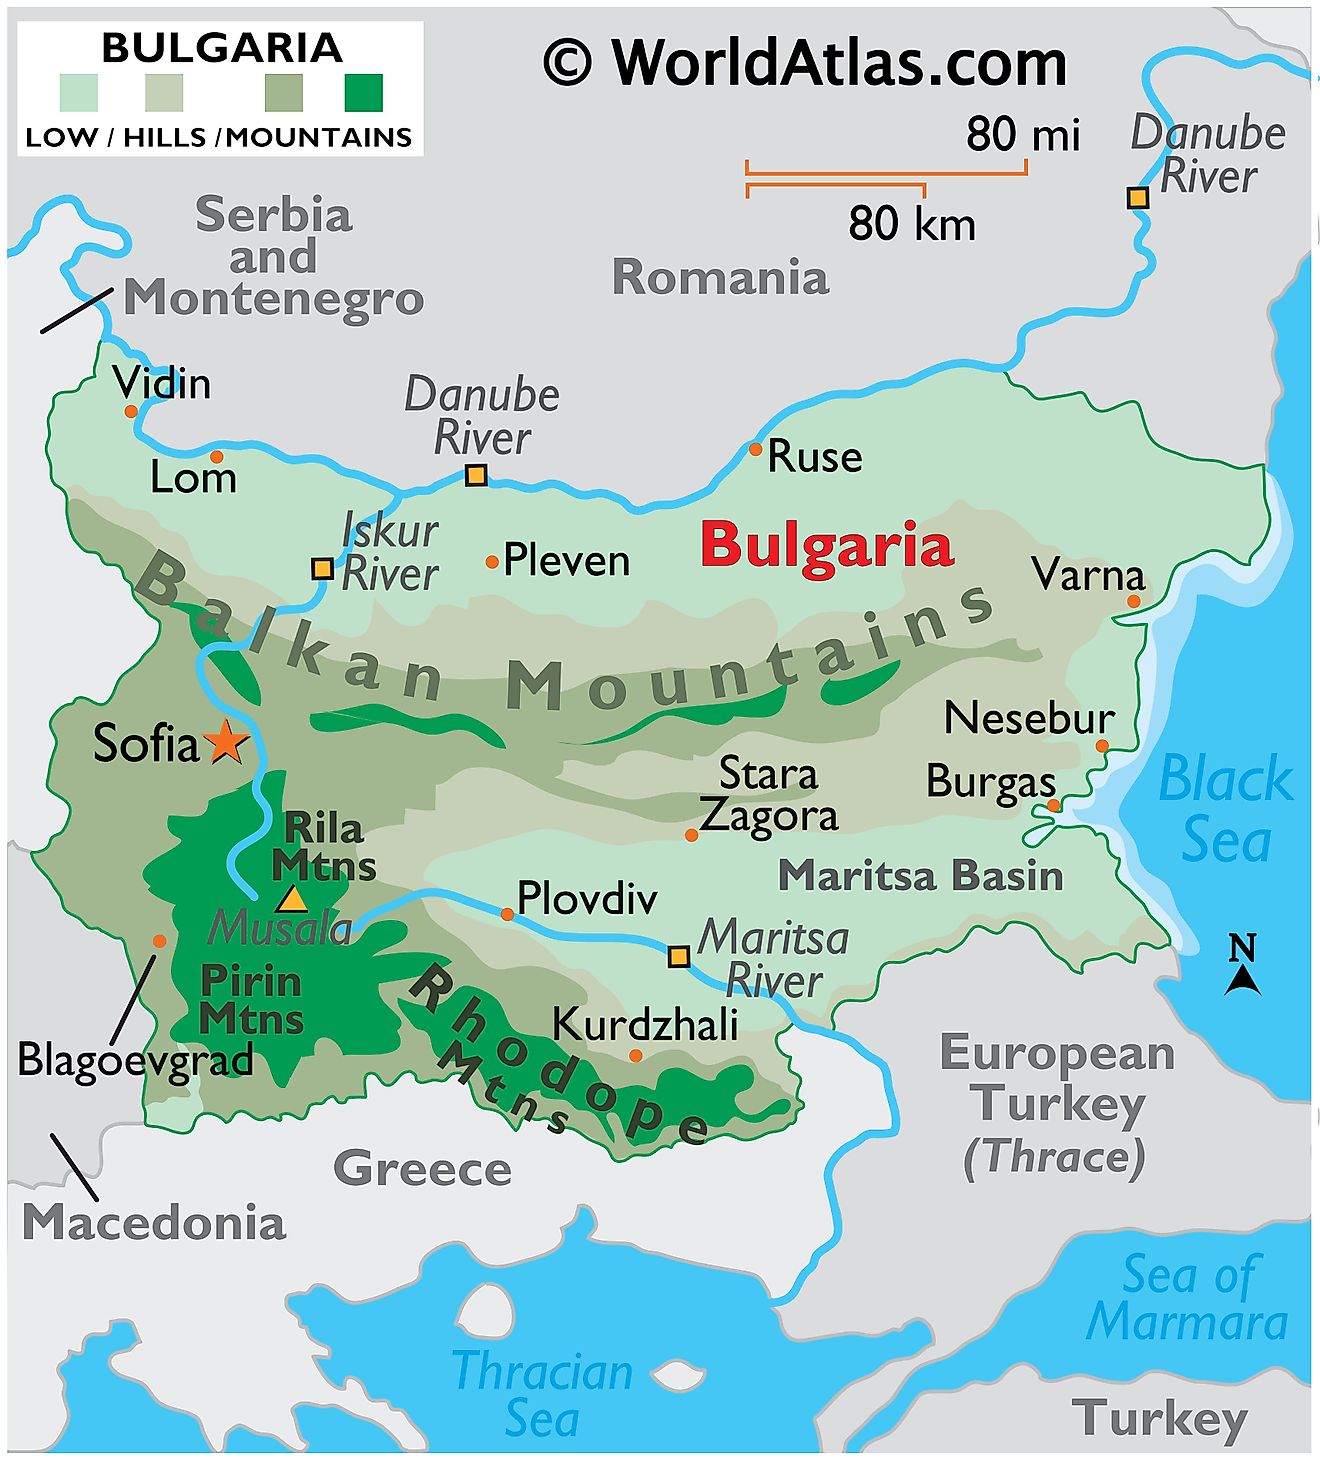 Physical Map of Bulgaria showing relief, major mountain ranges, rivers, extreme points, international boundaries, surrounding seas, important cities, etc.